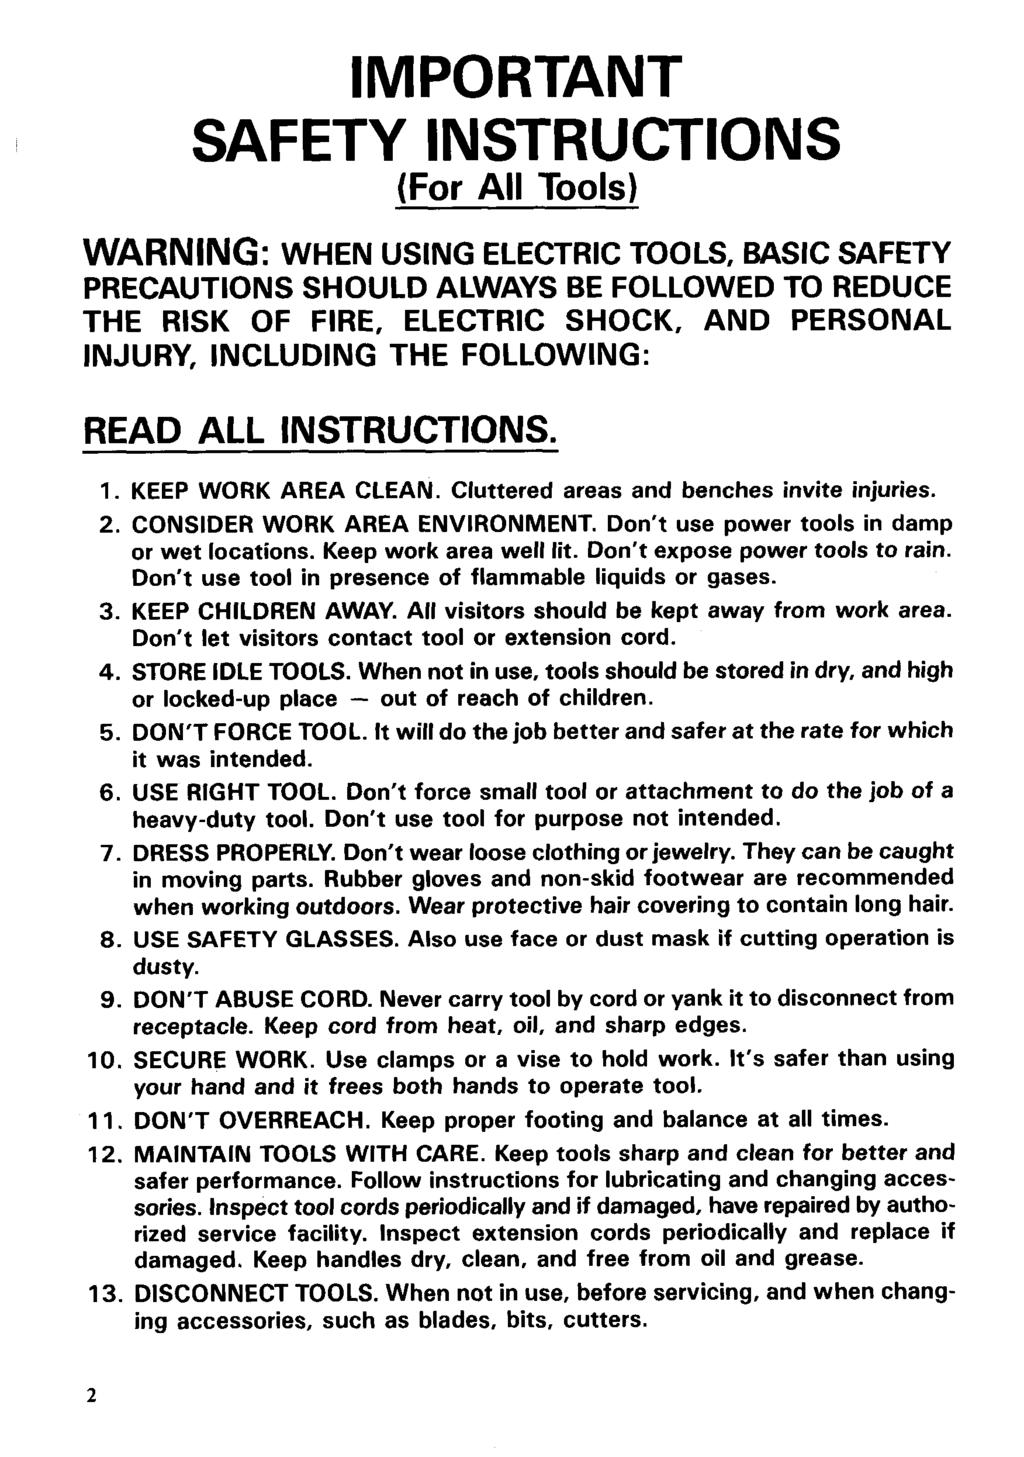 IMPORTANT SAFETY INSTRUCTIONS (For All Tools) WARNING: WHEN USING ELECTRIC TOOLS, BASIC SAFETY PRECAUTIONS SHOULD ALWAYS BE FOLLOWED TO REDUCE THE RISK OF FIRE, ELECTRIC SHOCK, AND PERSONAL INJURY,